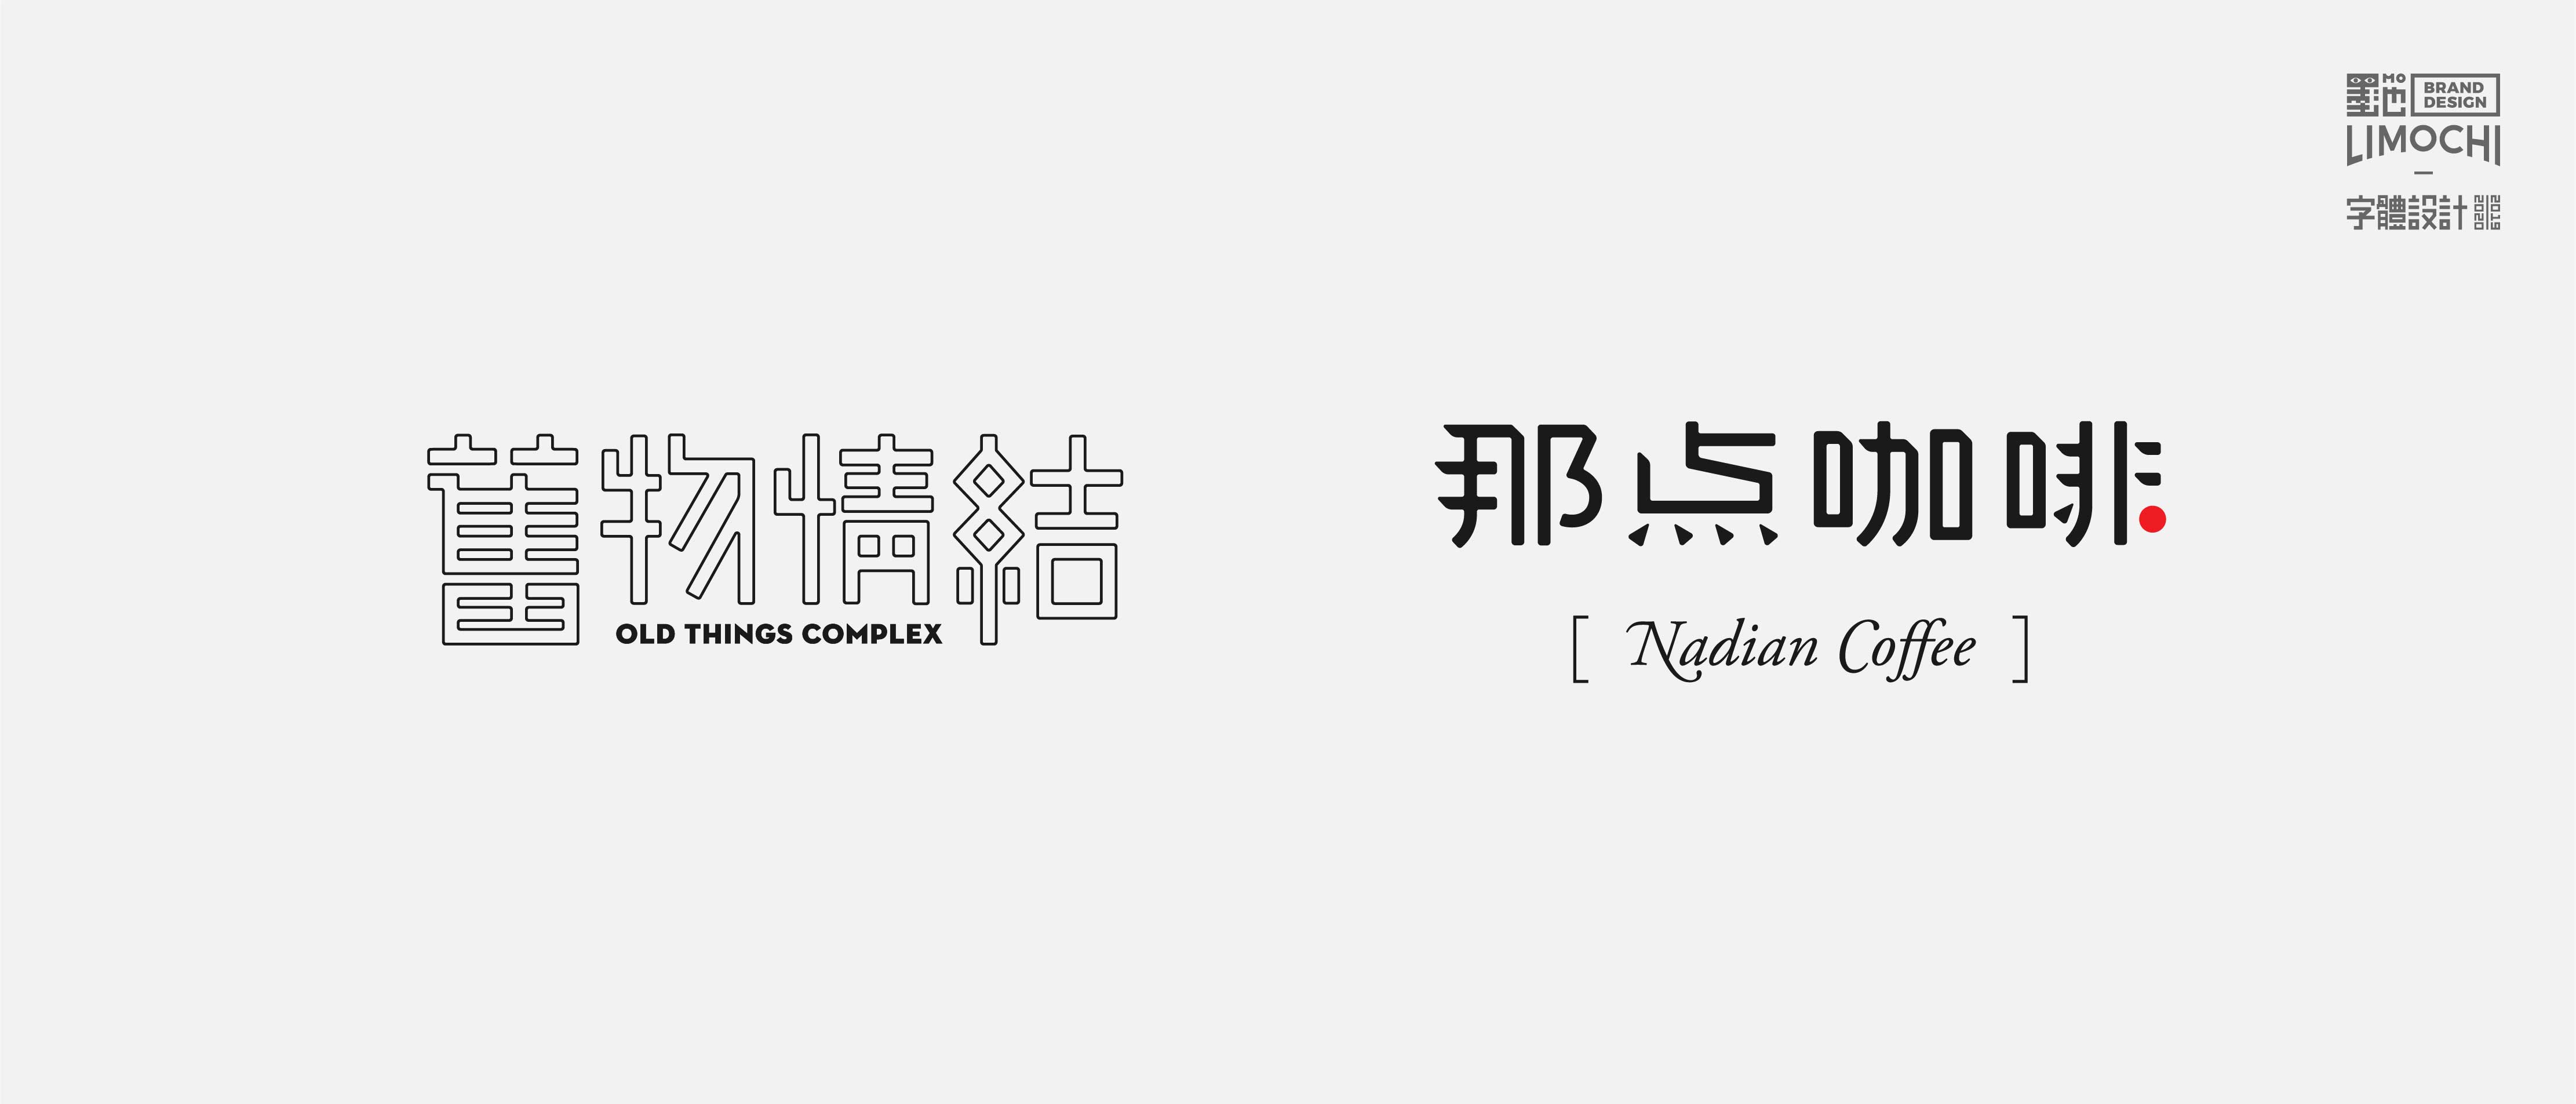 17P Chinese font design collection inspiration #.111